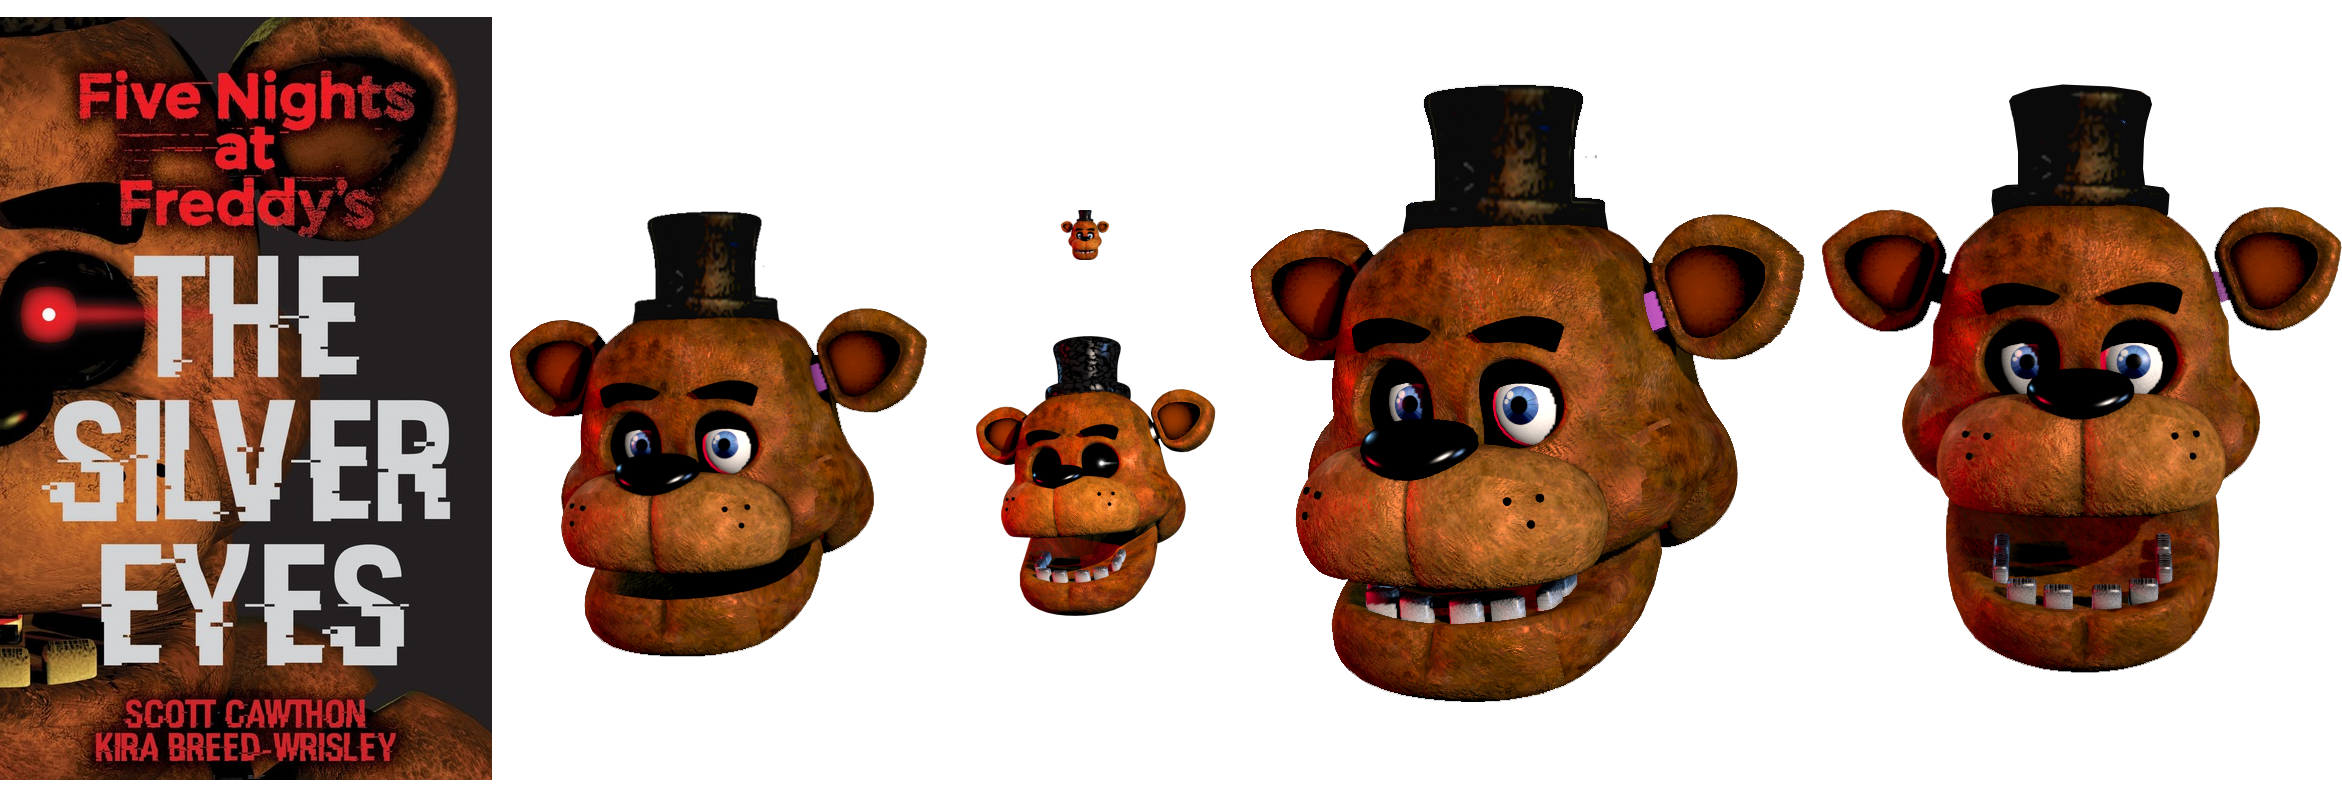 Withered Freddy Comparison by YinyangGio1987 on DeviantArt